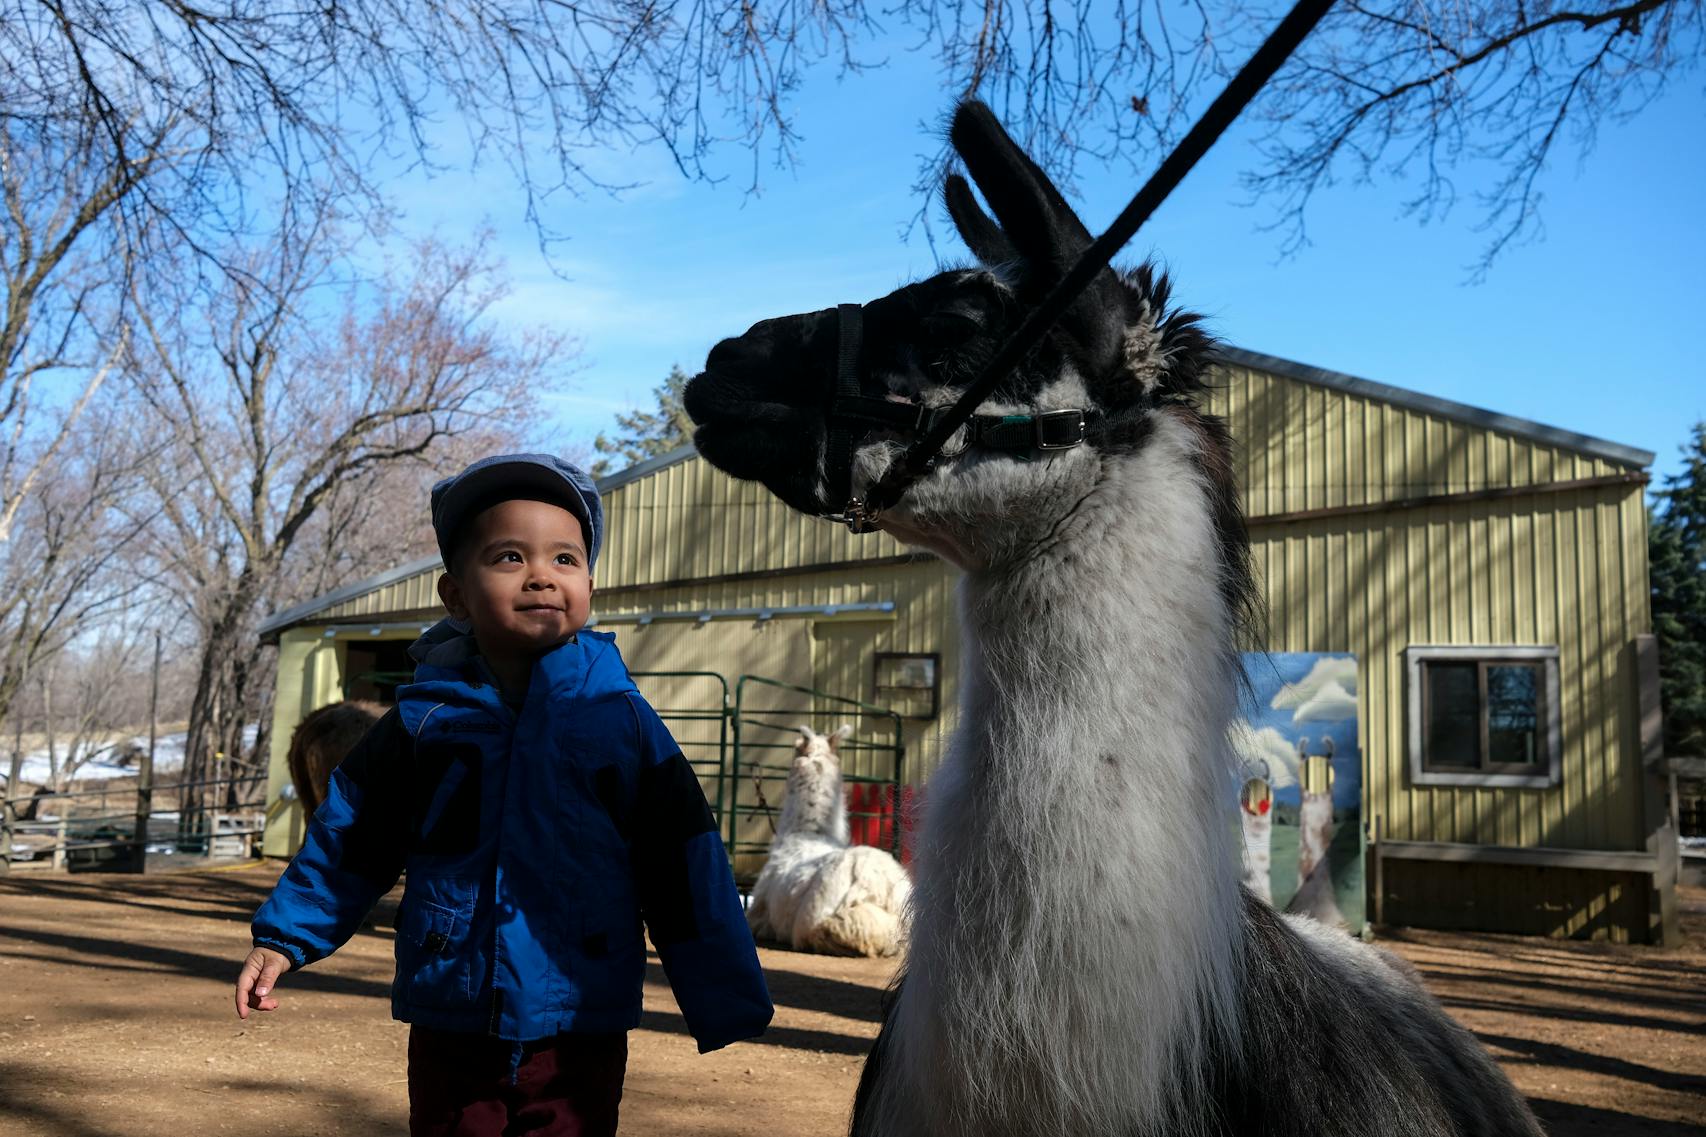 The llamas at Carlson’s Llovable Llames, including Zorro, are indeed lovable. 